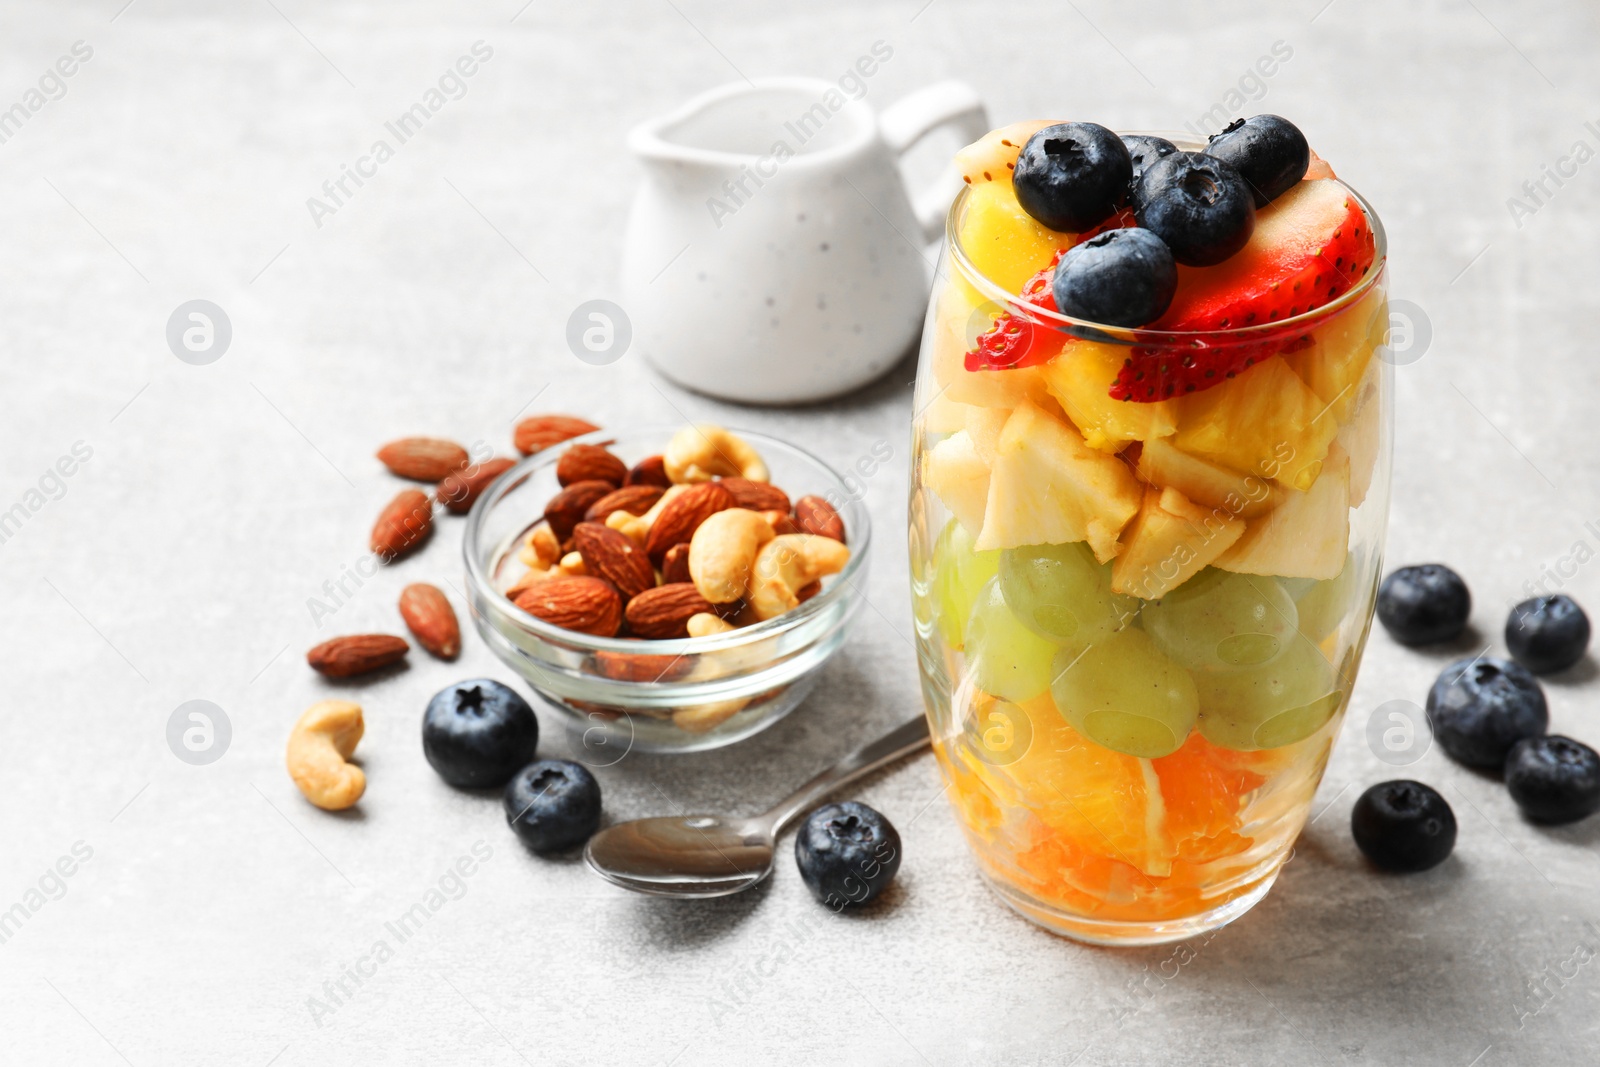 Photo of Delicious fruit salad, fresh berries and nuts on light grey table